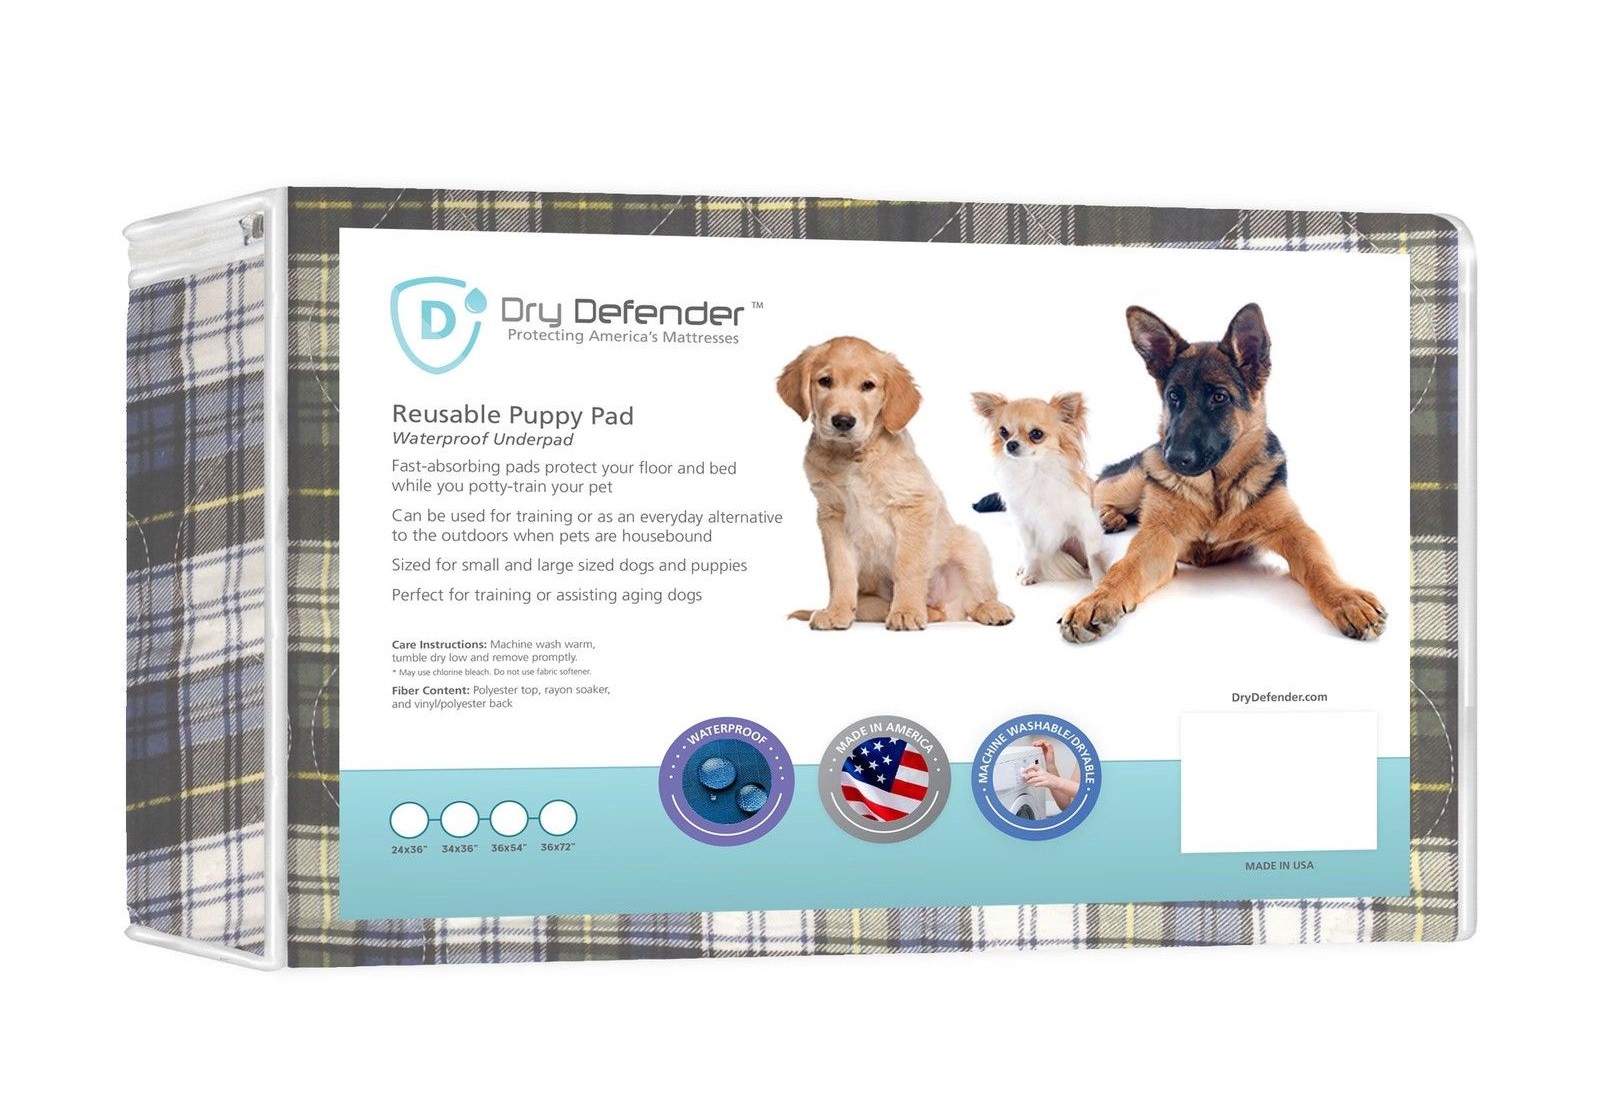 Dry Defender Reusable Puppy Pad Review